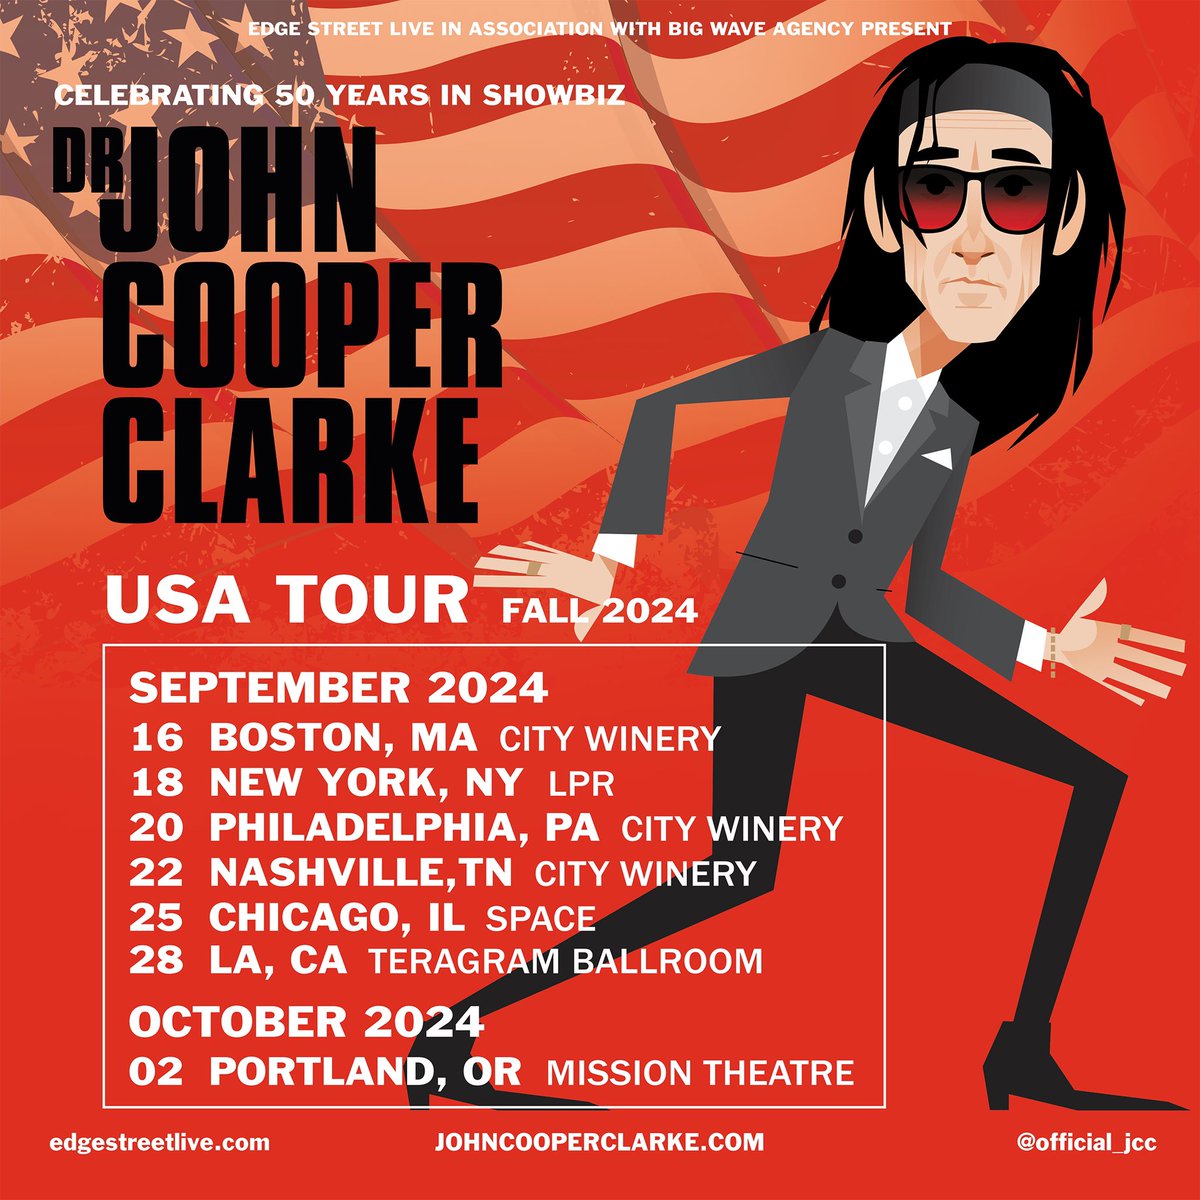 He's coming to America🎙🇺🇸 The Doctor is heading back to the U.S. of A. this Autumn with seven very special shows spanning from Boston to Oregon and NYC to LA. Grab some tickets via the 🔗 below - you don't wanna miss this 🎟 johncooperclarke.com